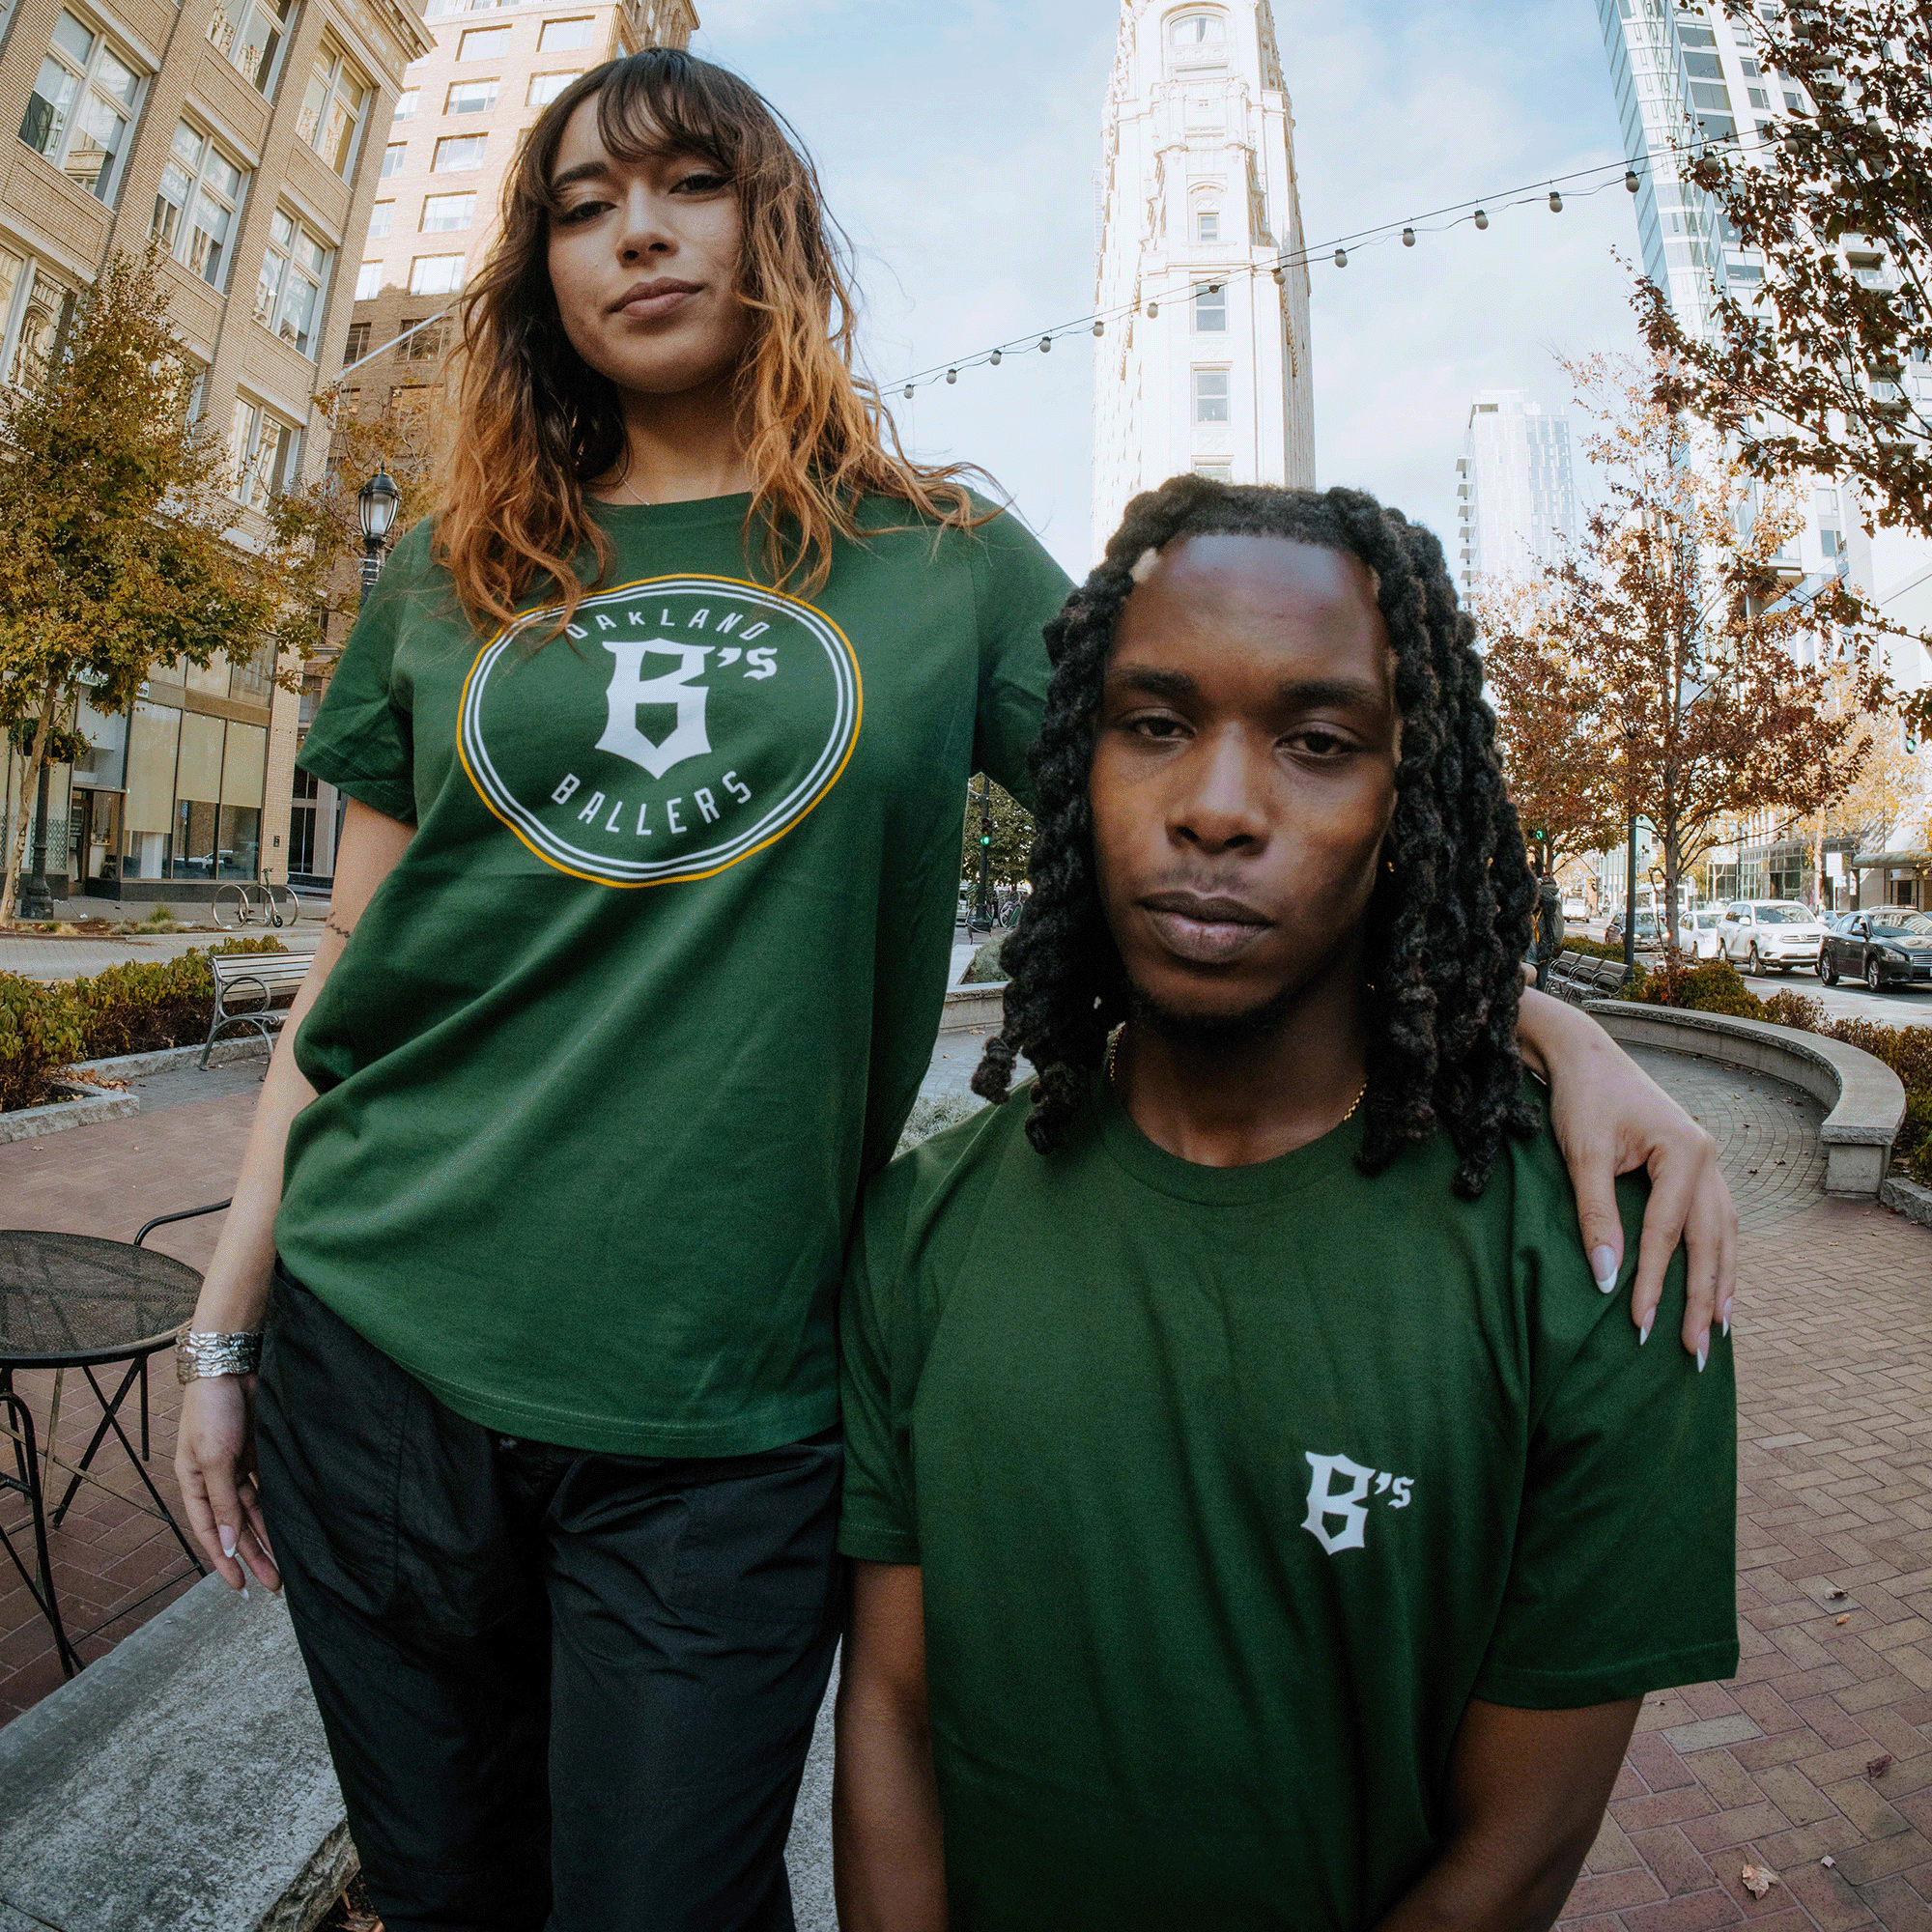 Woman and man outdoors in Oakland wearing green Oakland B’s logoed t-shirts.